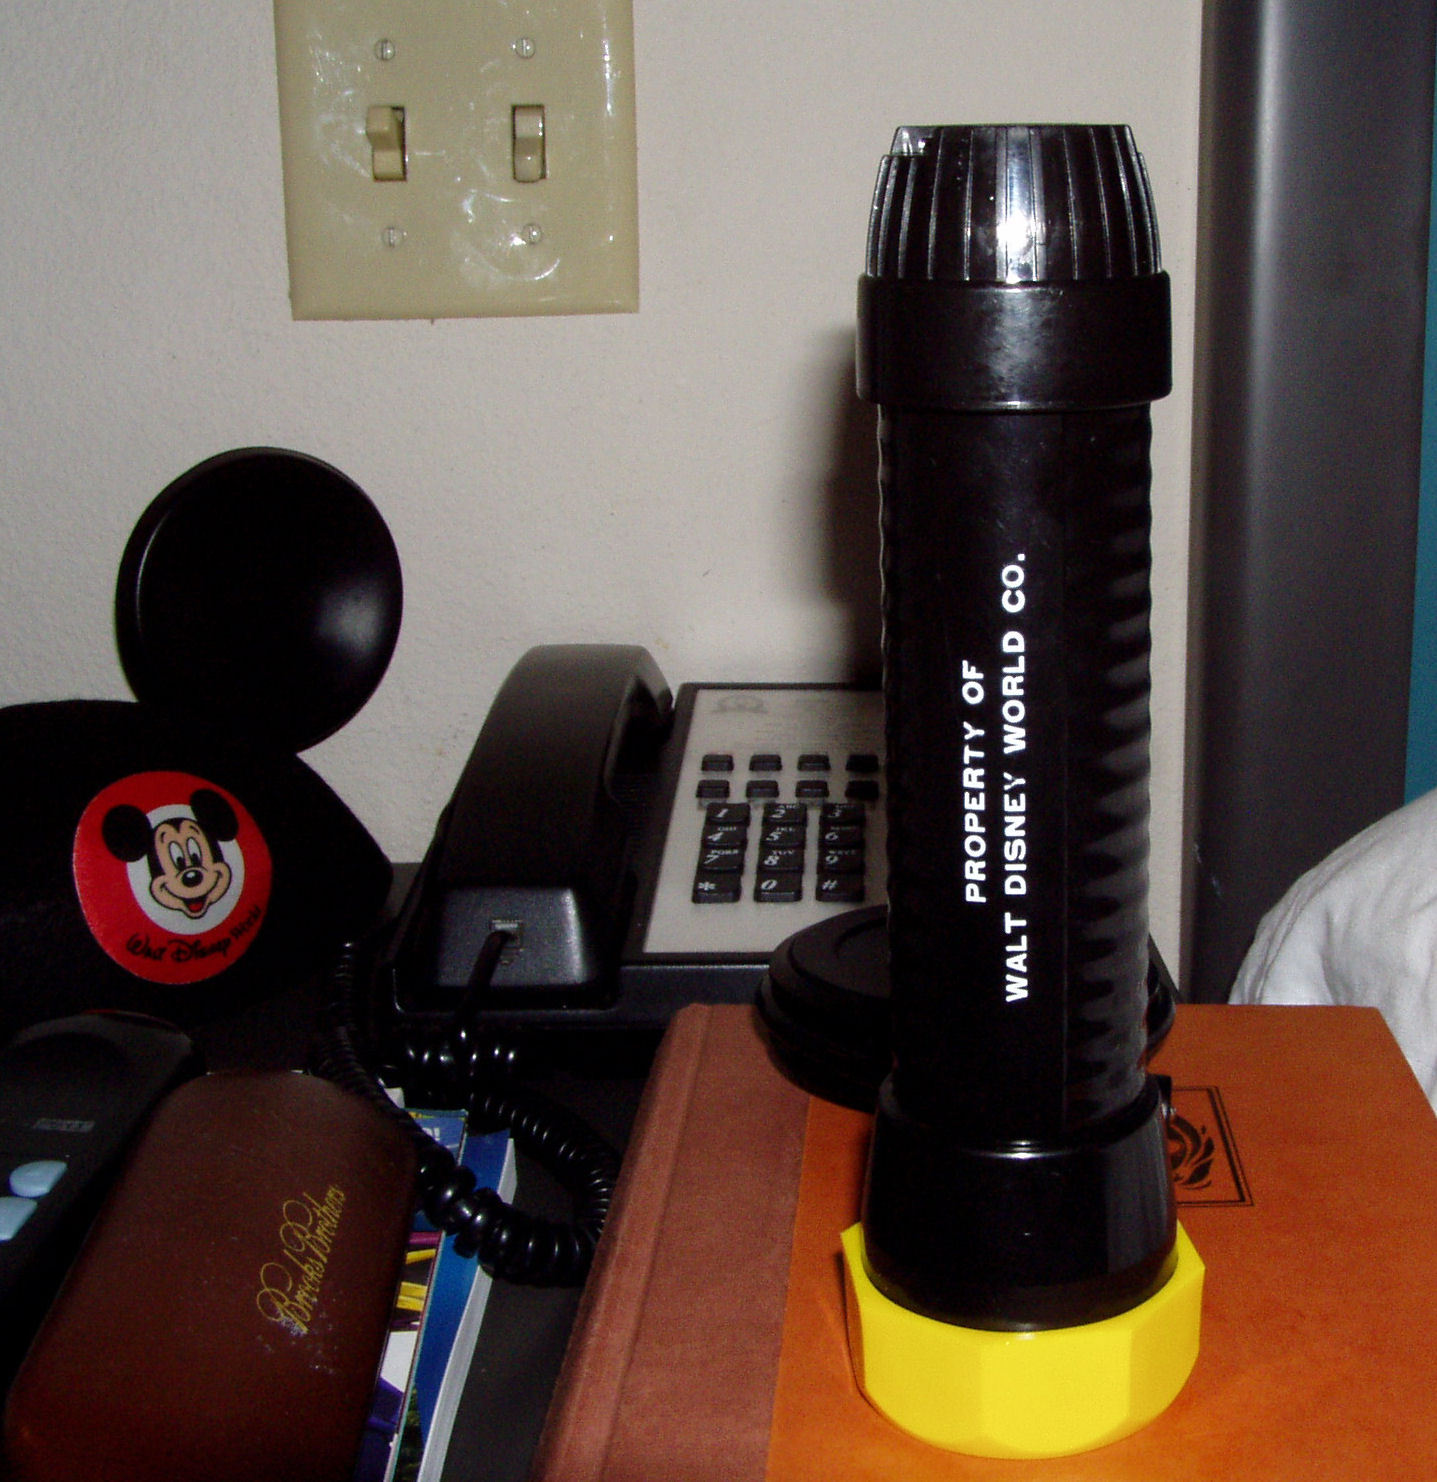 A flashlight that was delivered to our hotel room in case the power went out while Hurricane Charlie passed through. (We kept the flashlight afterwards)